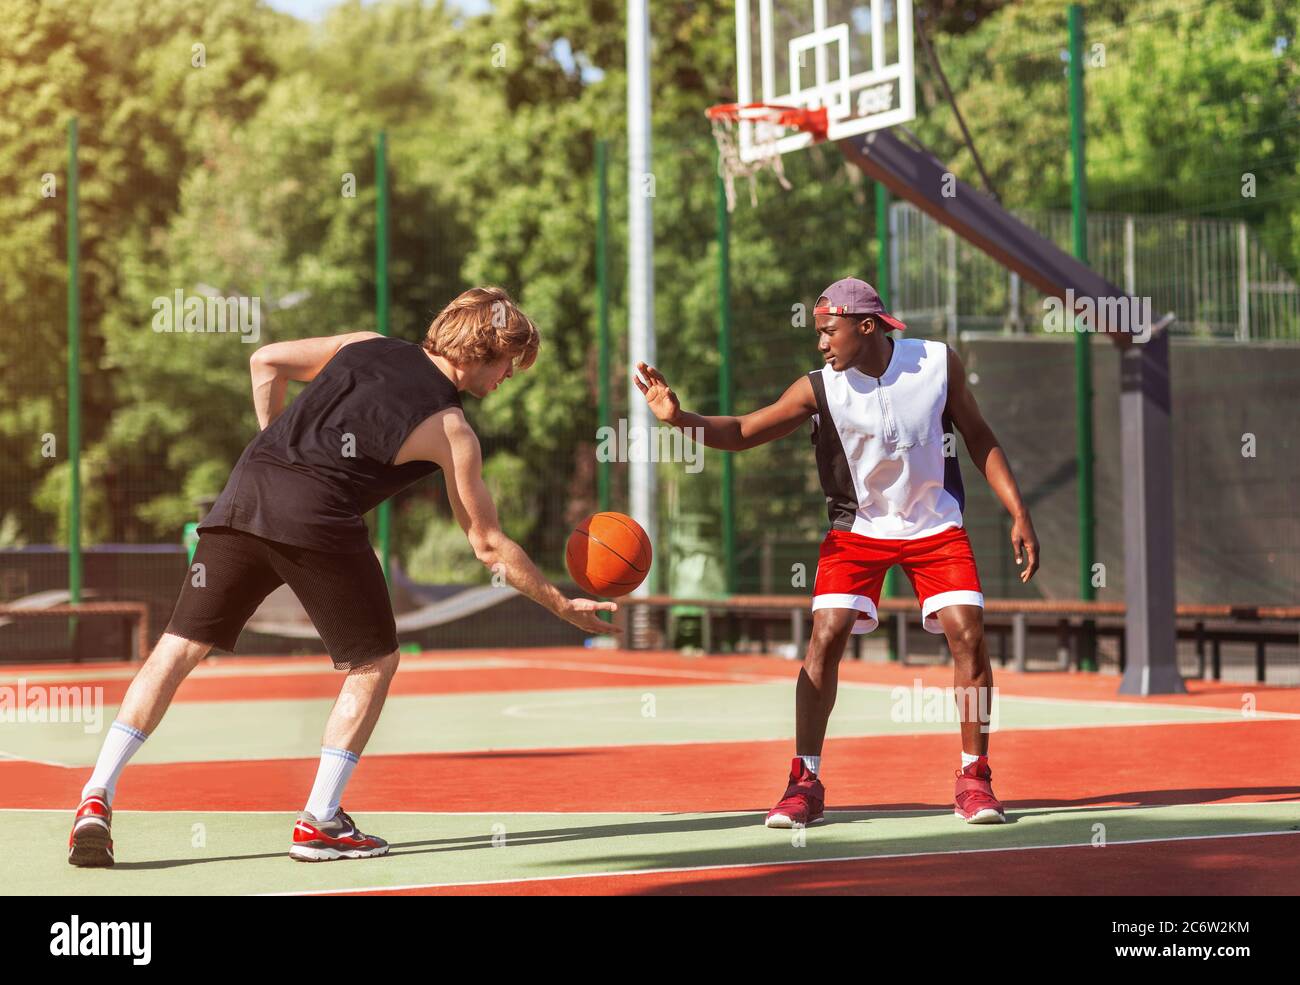 African American and Caucasian basketballers playing game match at outdoor court Stock Photo